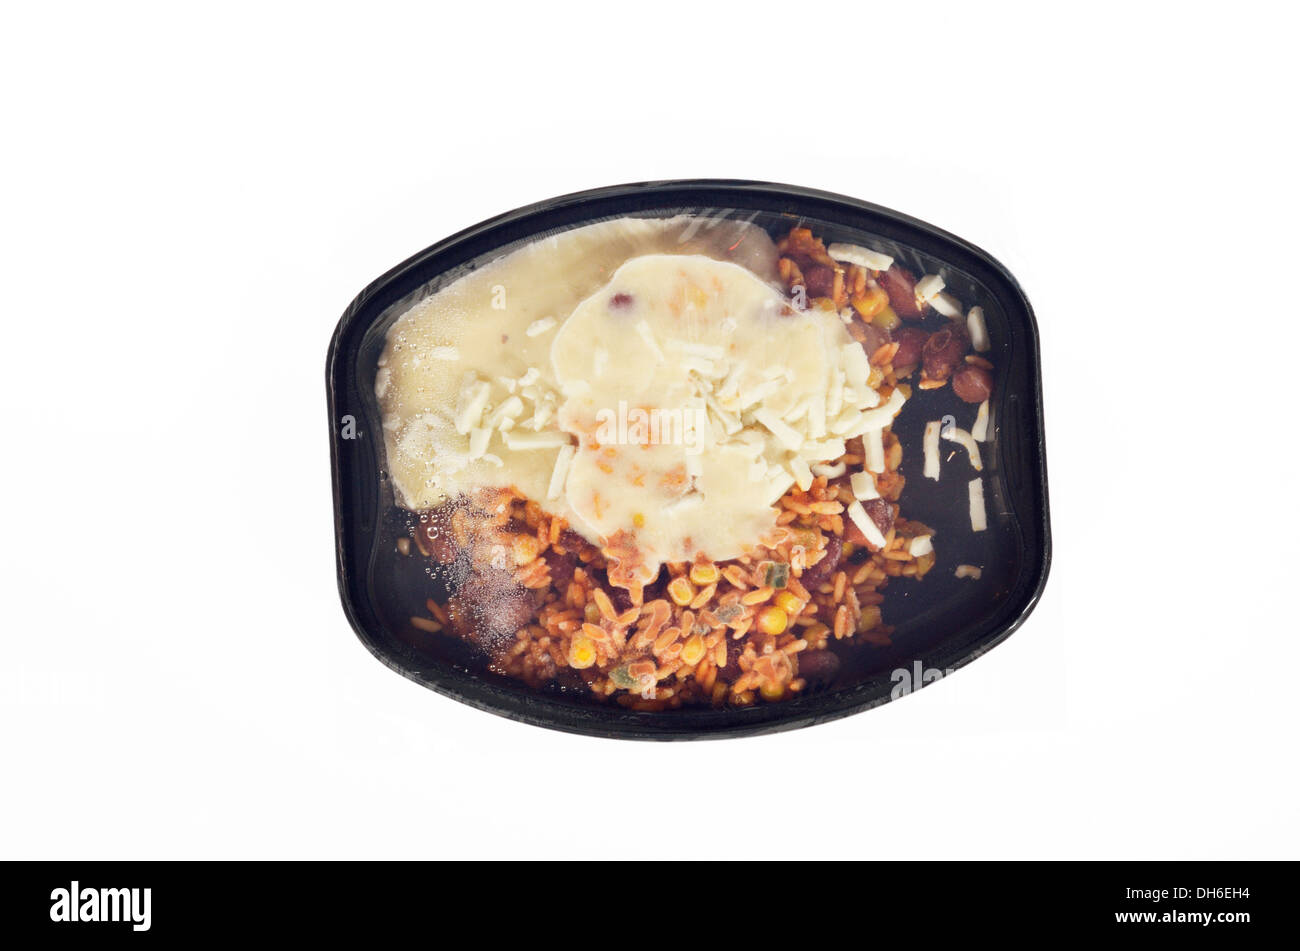 Frozen ready meal of red beans, rice and cheeses before microwaving on white background, cutout. Stock Photo